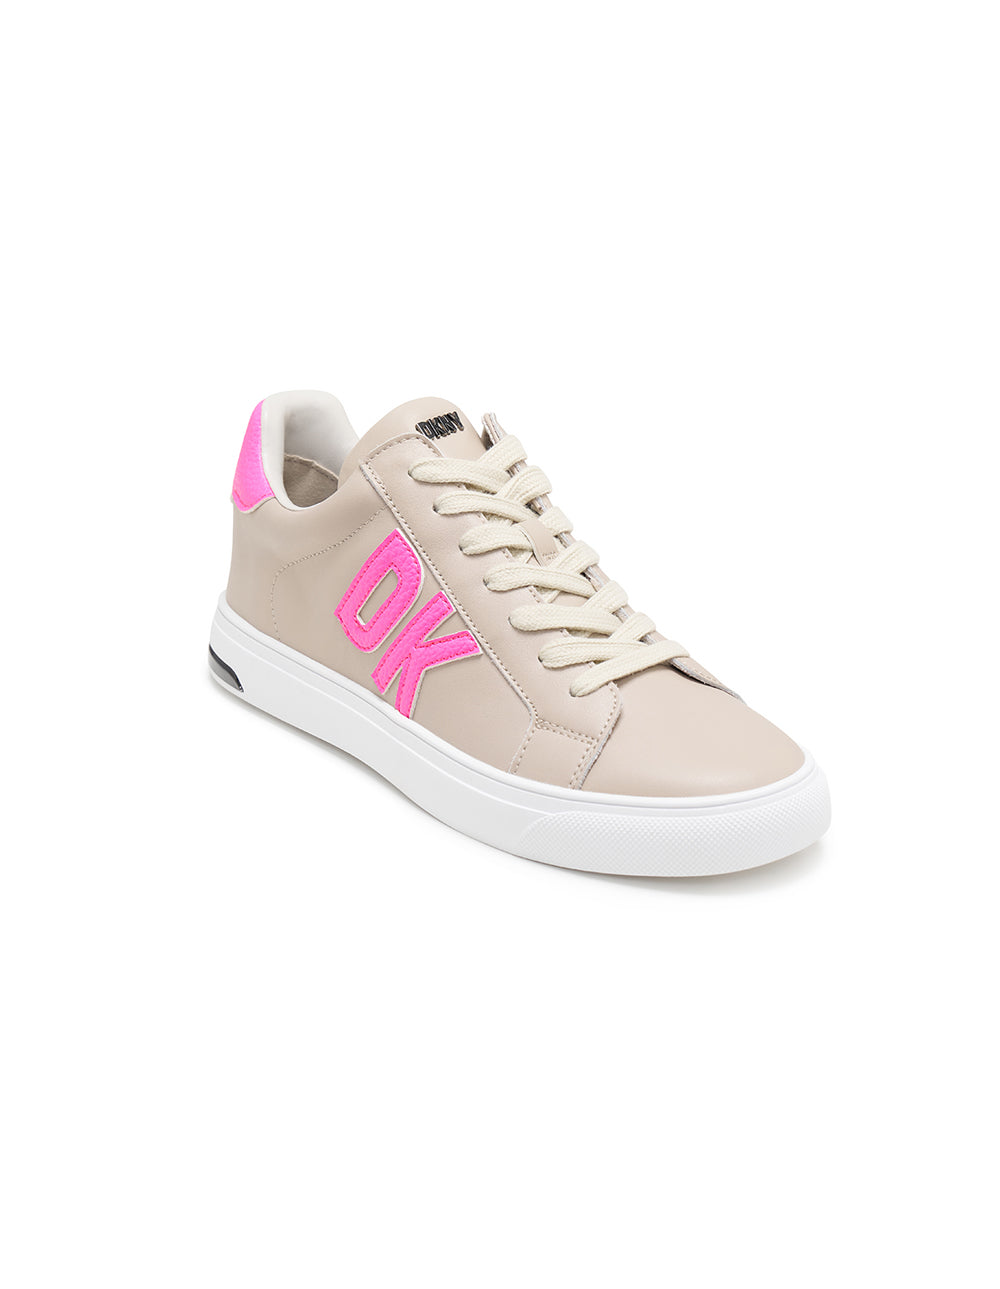 Abeni Lace Up Sneakers